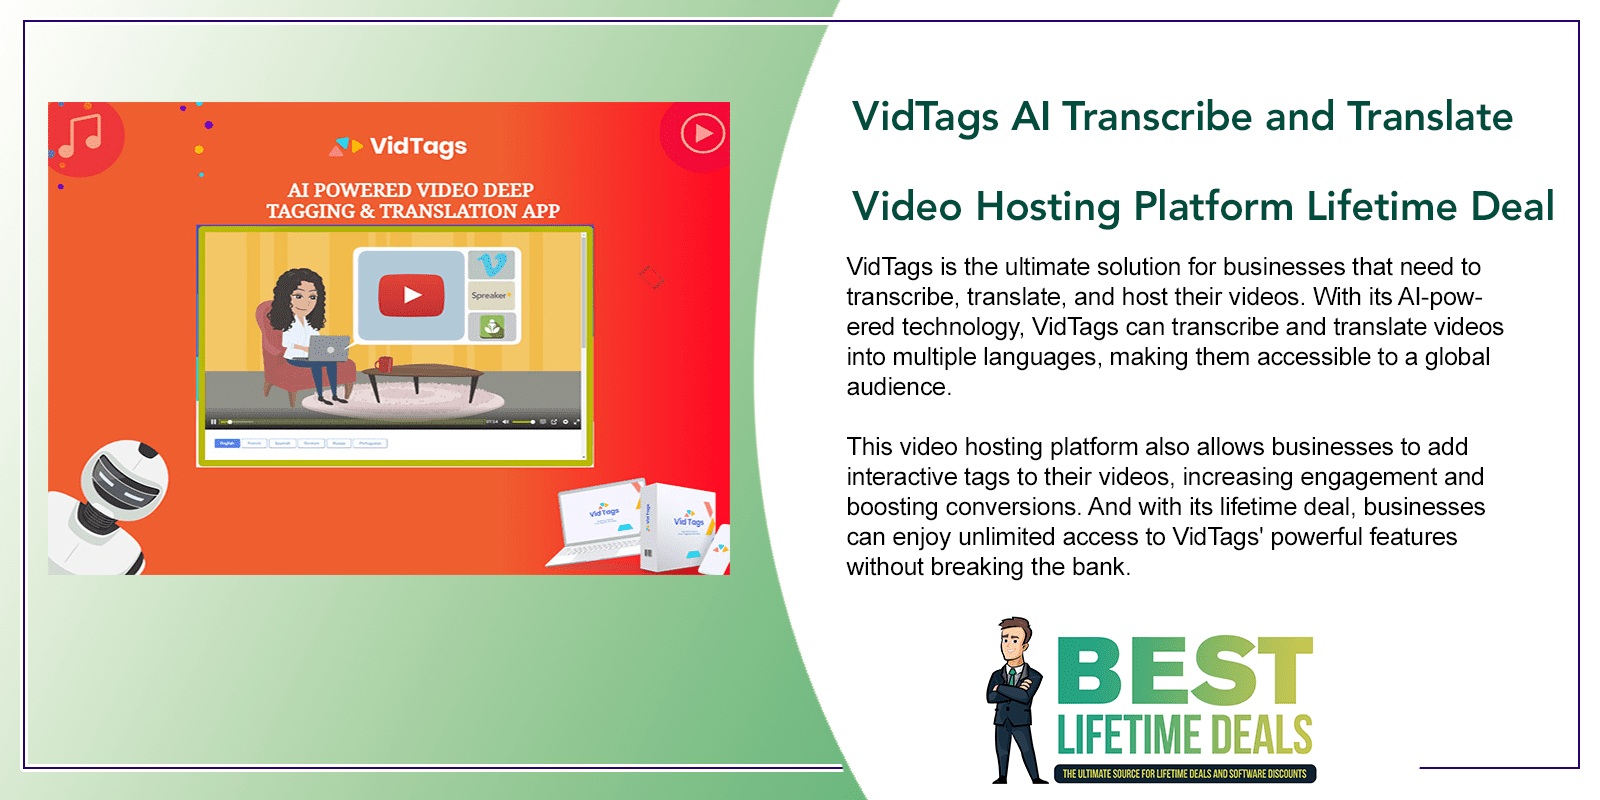 VidTags AI Transcribe and Translate Video Hosting Platform Lifetime Deal Featured Image